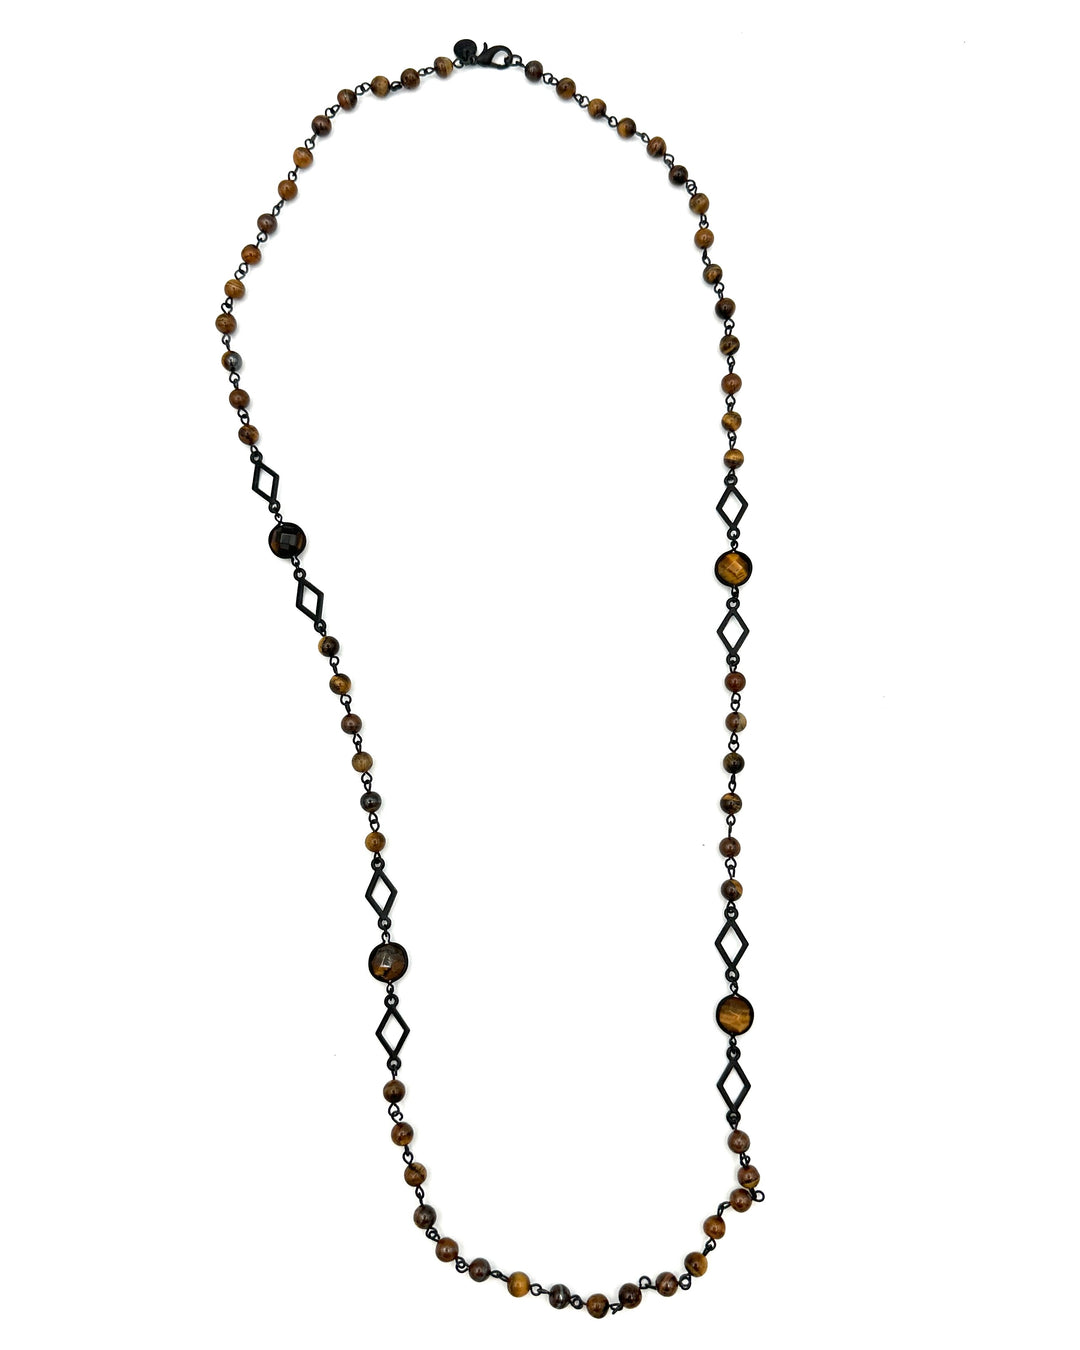 Black and Brown Beaded Necklace